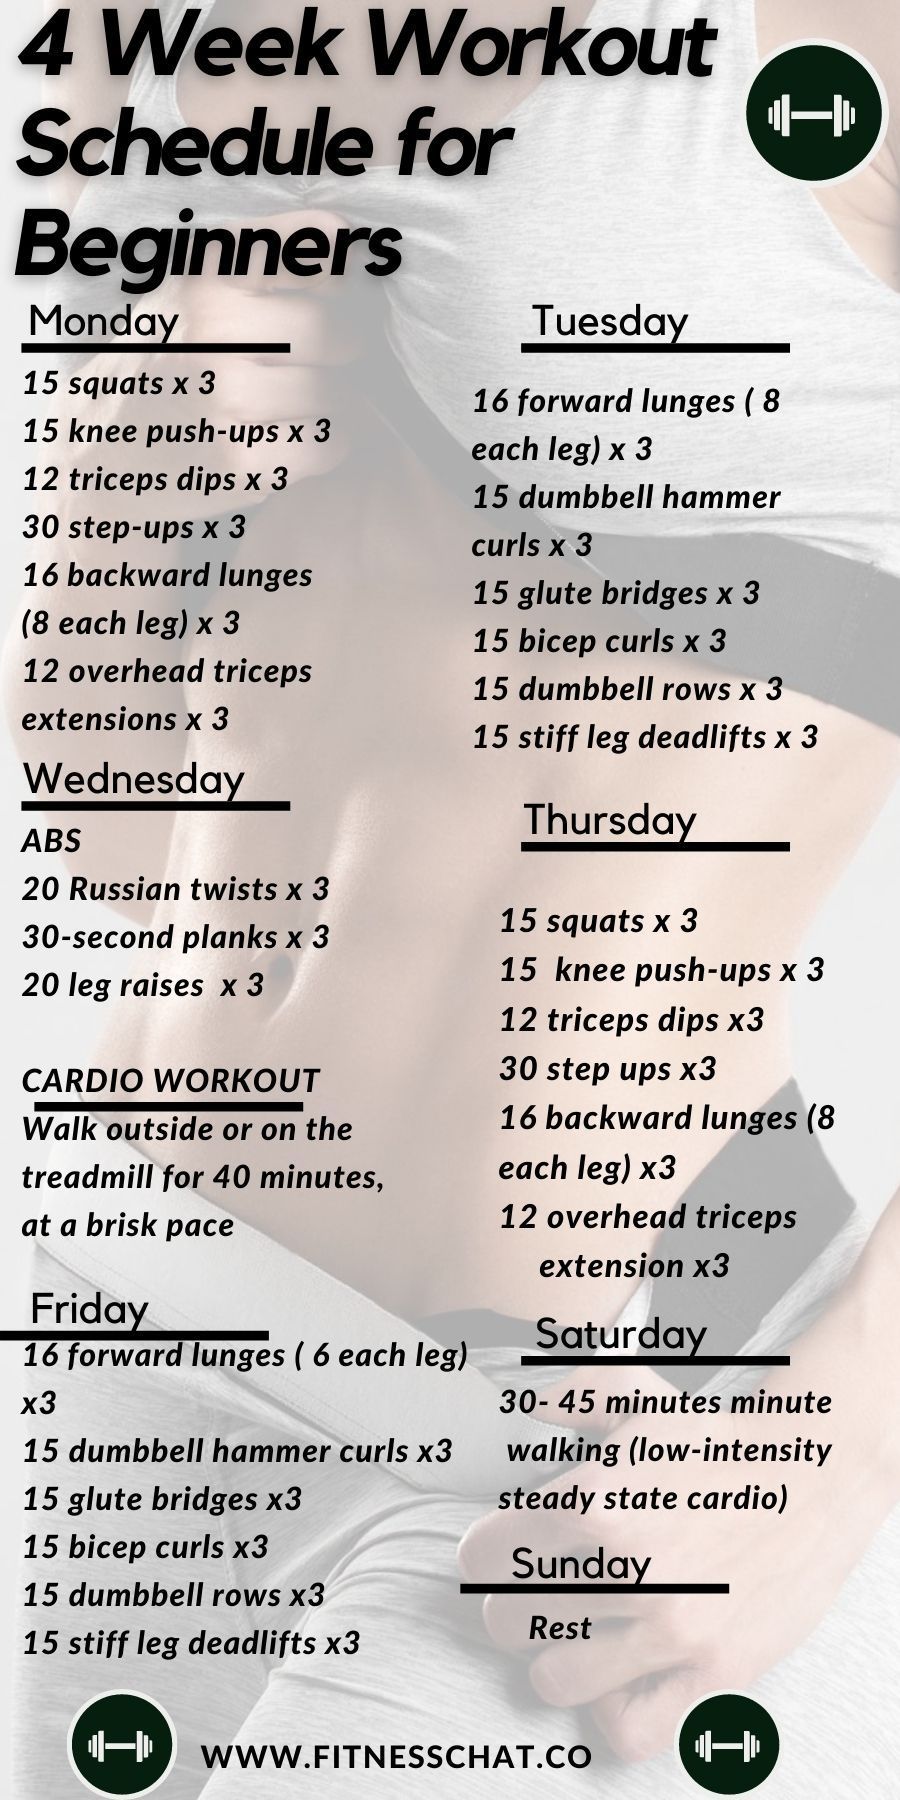 weight loss plans - weight loss plans -   18 workouts for beginners at home ideas